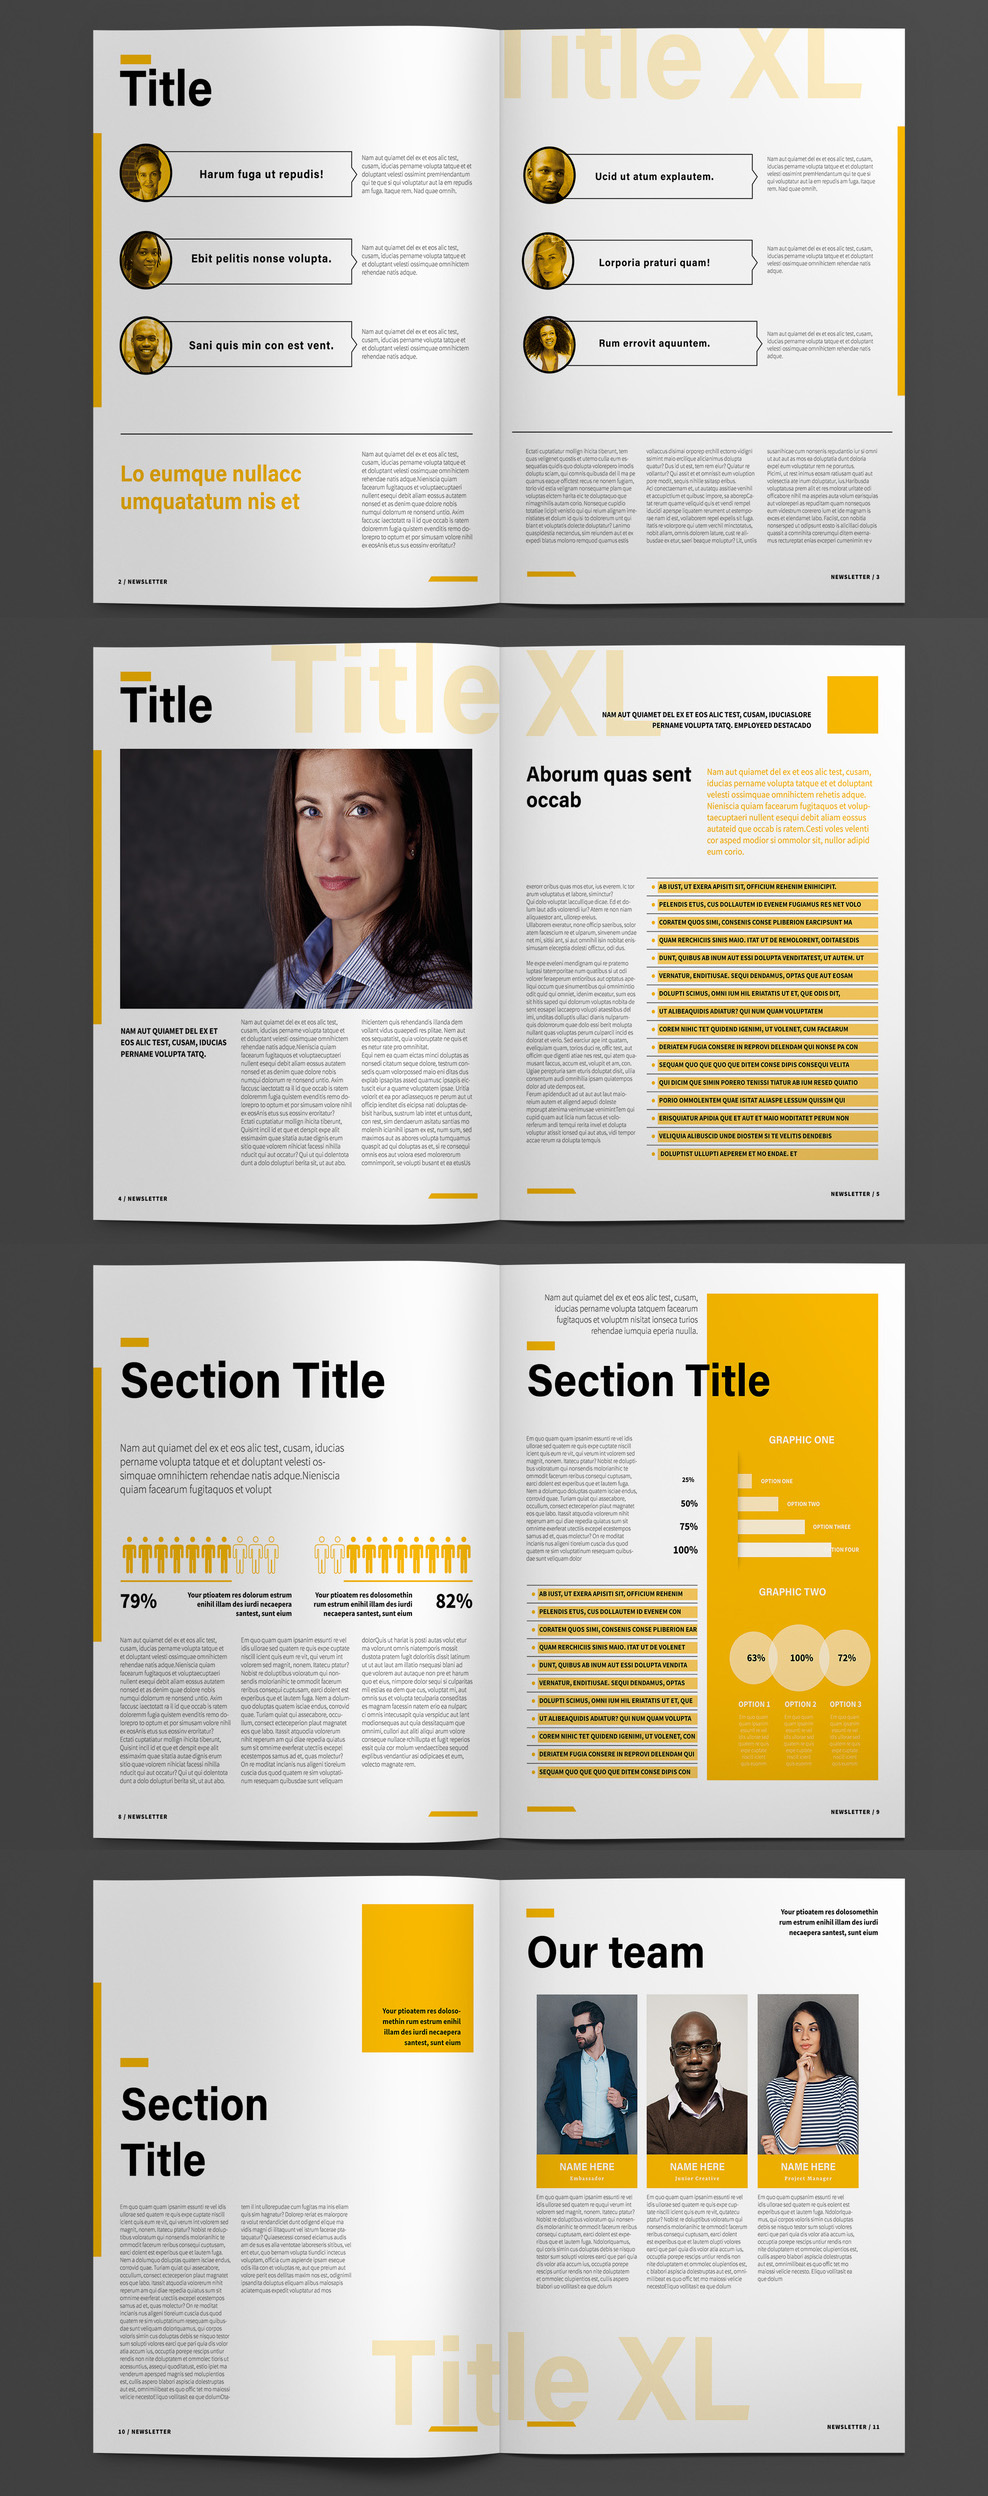 Free Newsletter Template for Adobe InDesign (INDD Format)